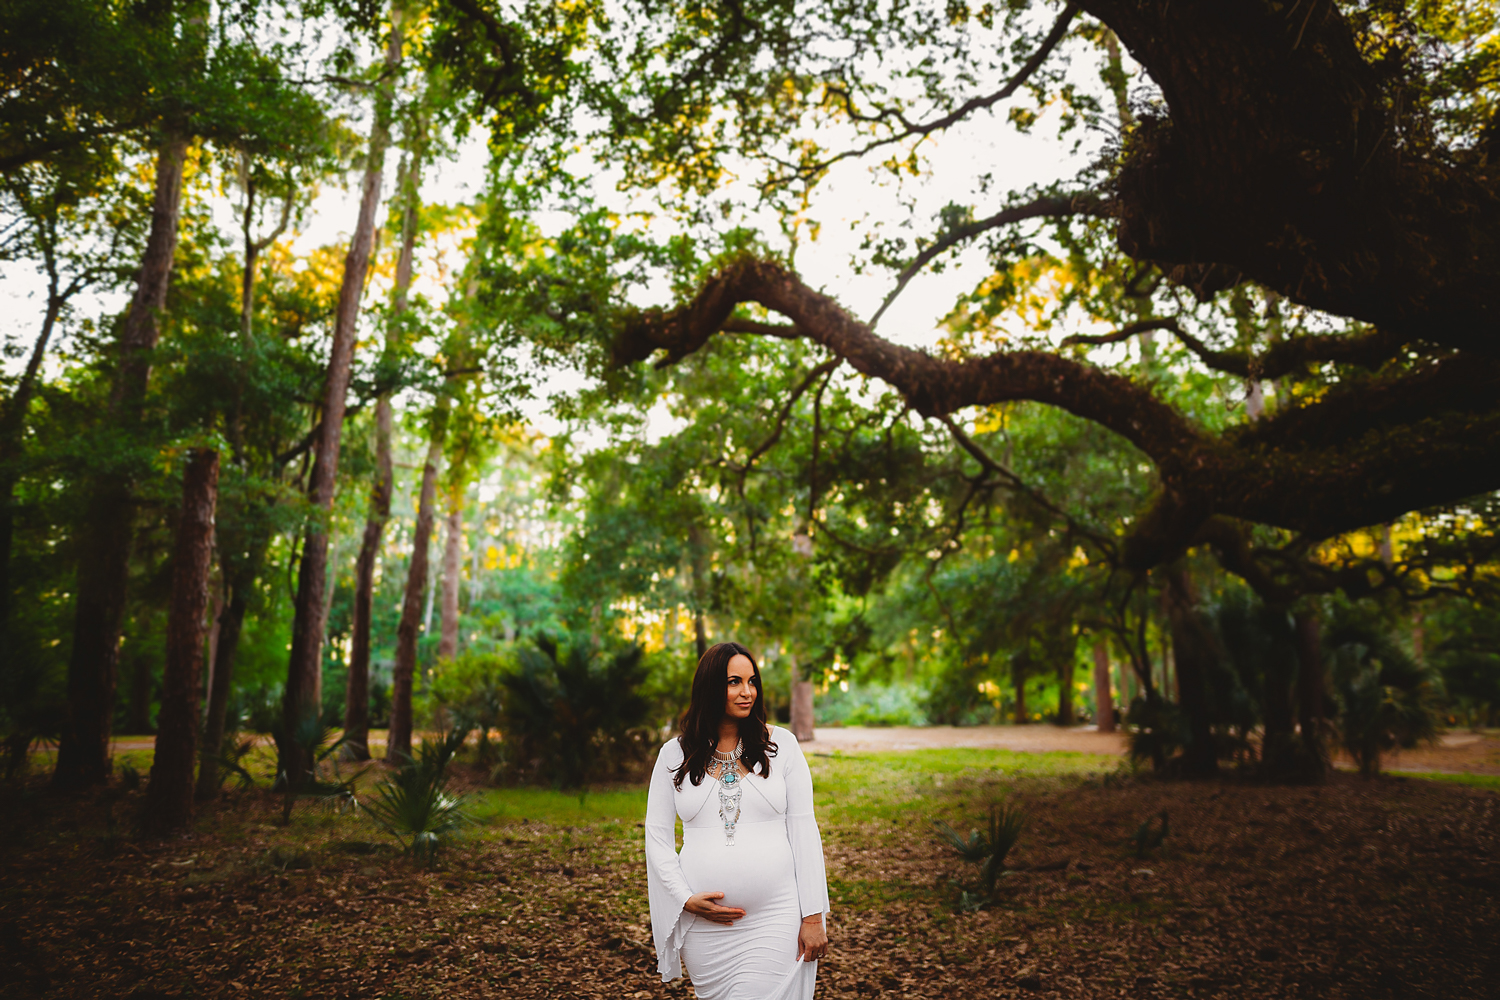 epic maternity photos, maternity photographer of pinellas county fl 